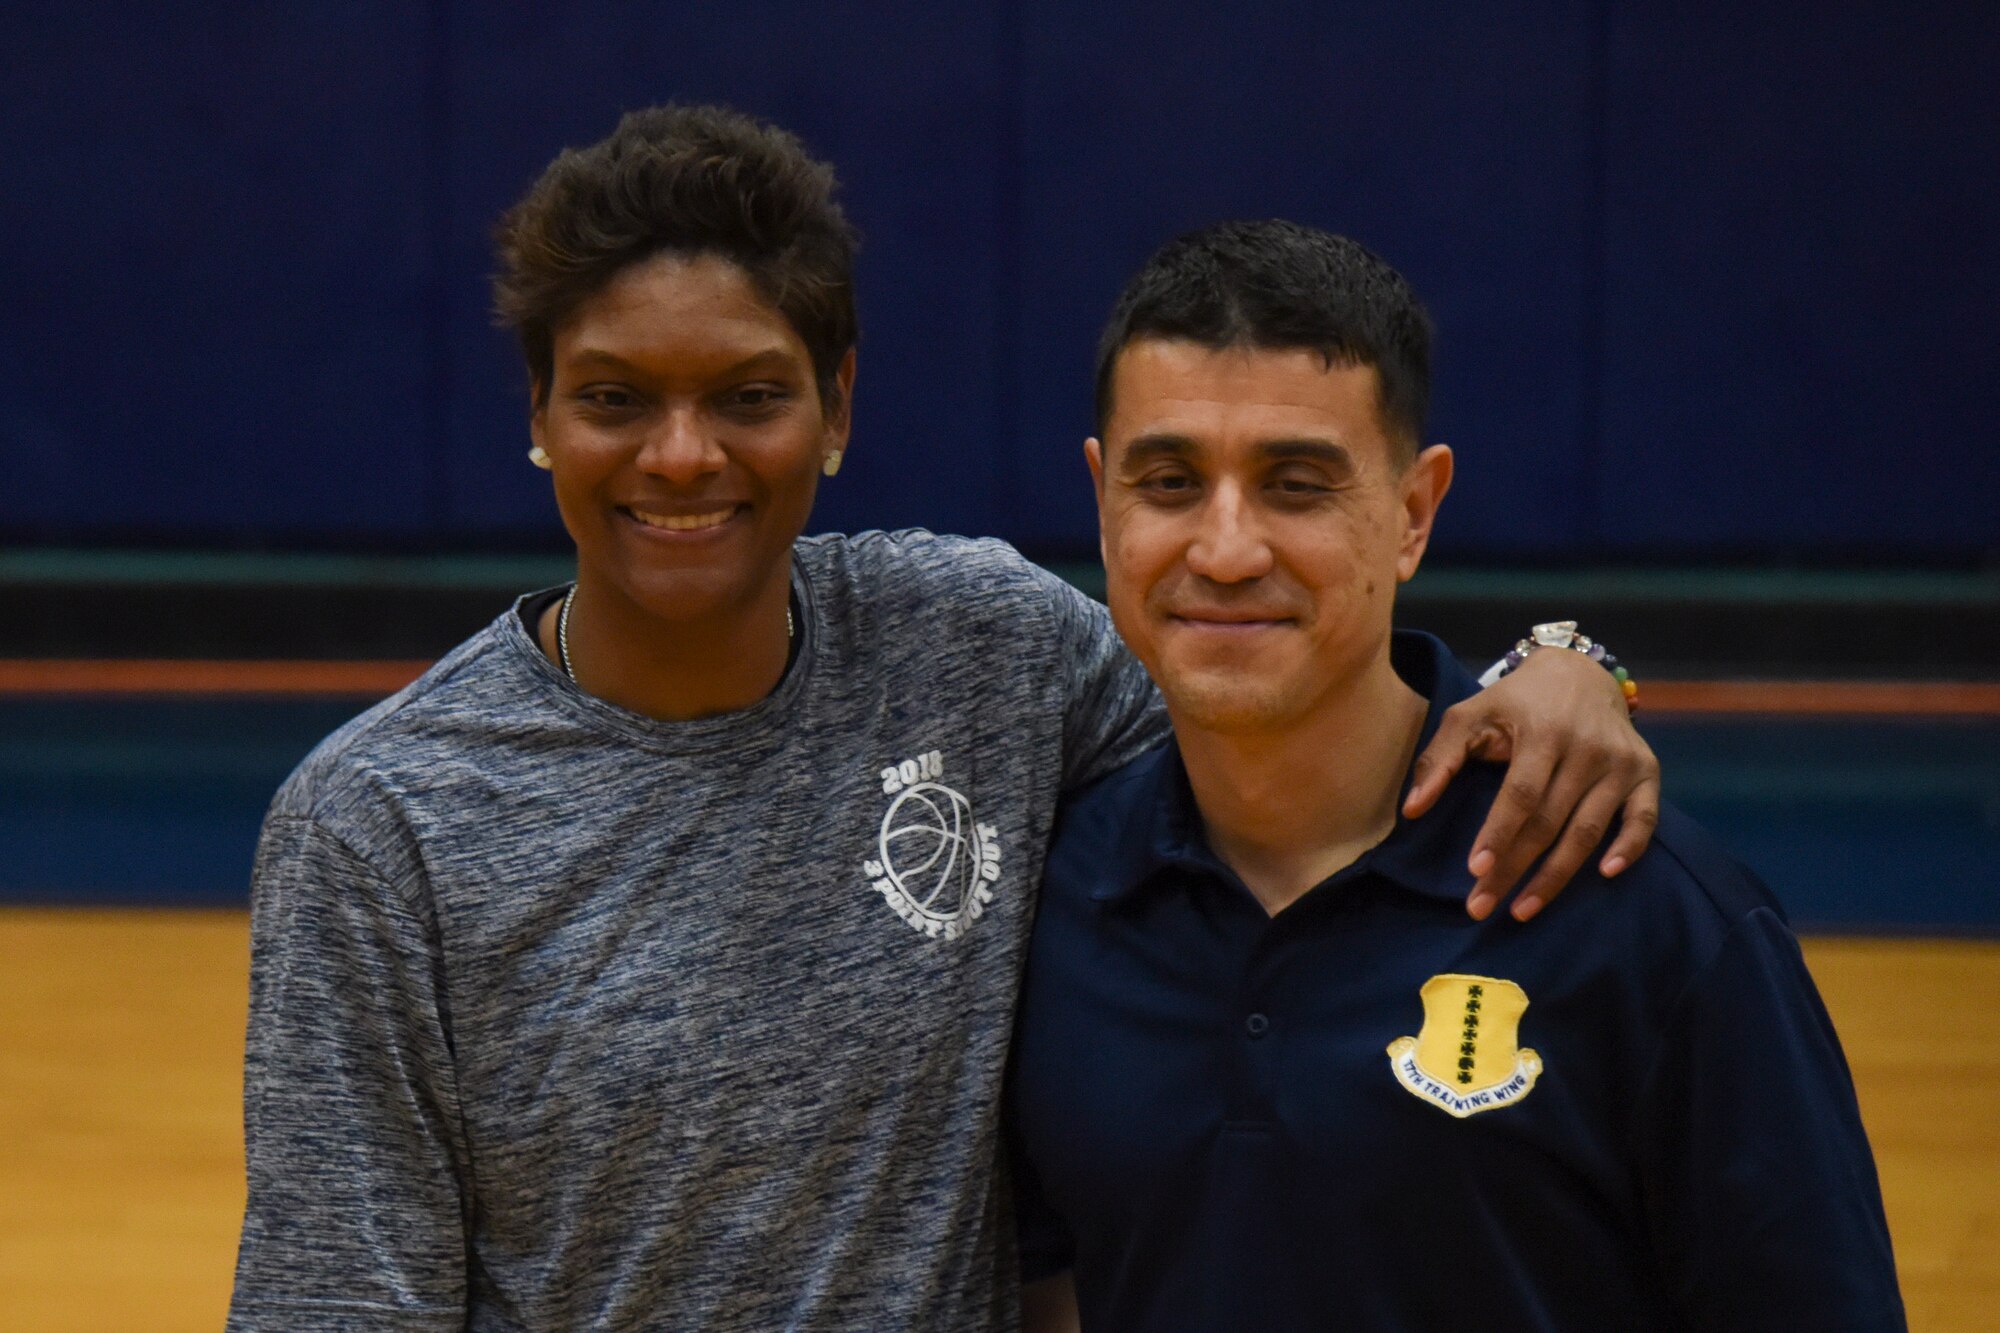 2017 NCAA Women’s Final Four Ambassador, Alicia Thompson poses with U.S. Air Force Col. Ricky Mills, 17th Training Wing commander, during the 3-on-3 tournament at the Mathis Fitness Center on Goodfellow Air Force Base, Texas, March 24, 2018. Thompson has visited Goodfellow before and shared during her speech that she hopes to continue visiting Goodfellow in the future. (U.S. Air Force photo by Airman 1st Class Zachary Chapman/Released)